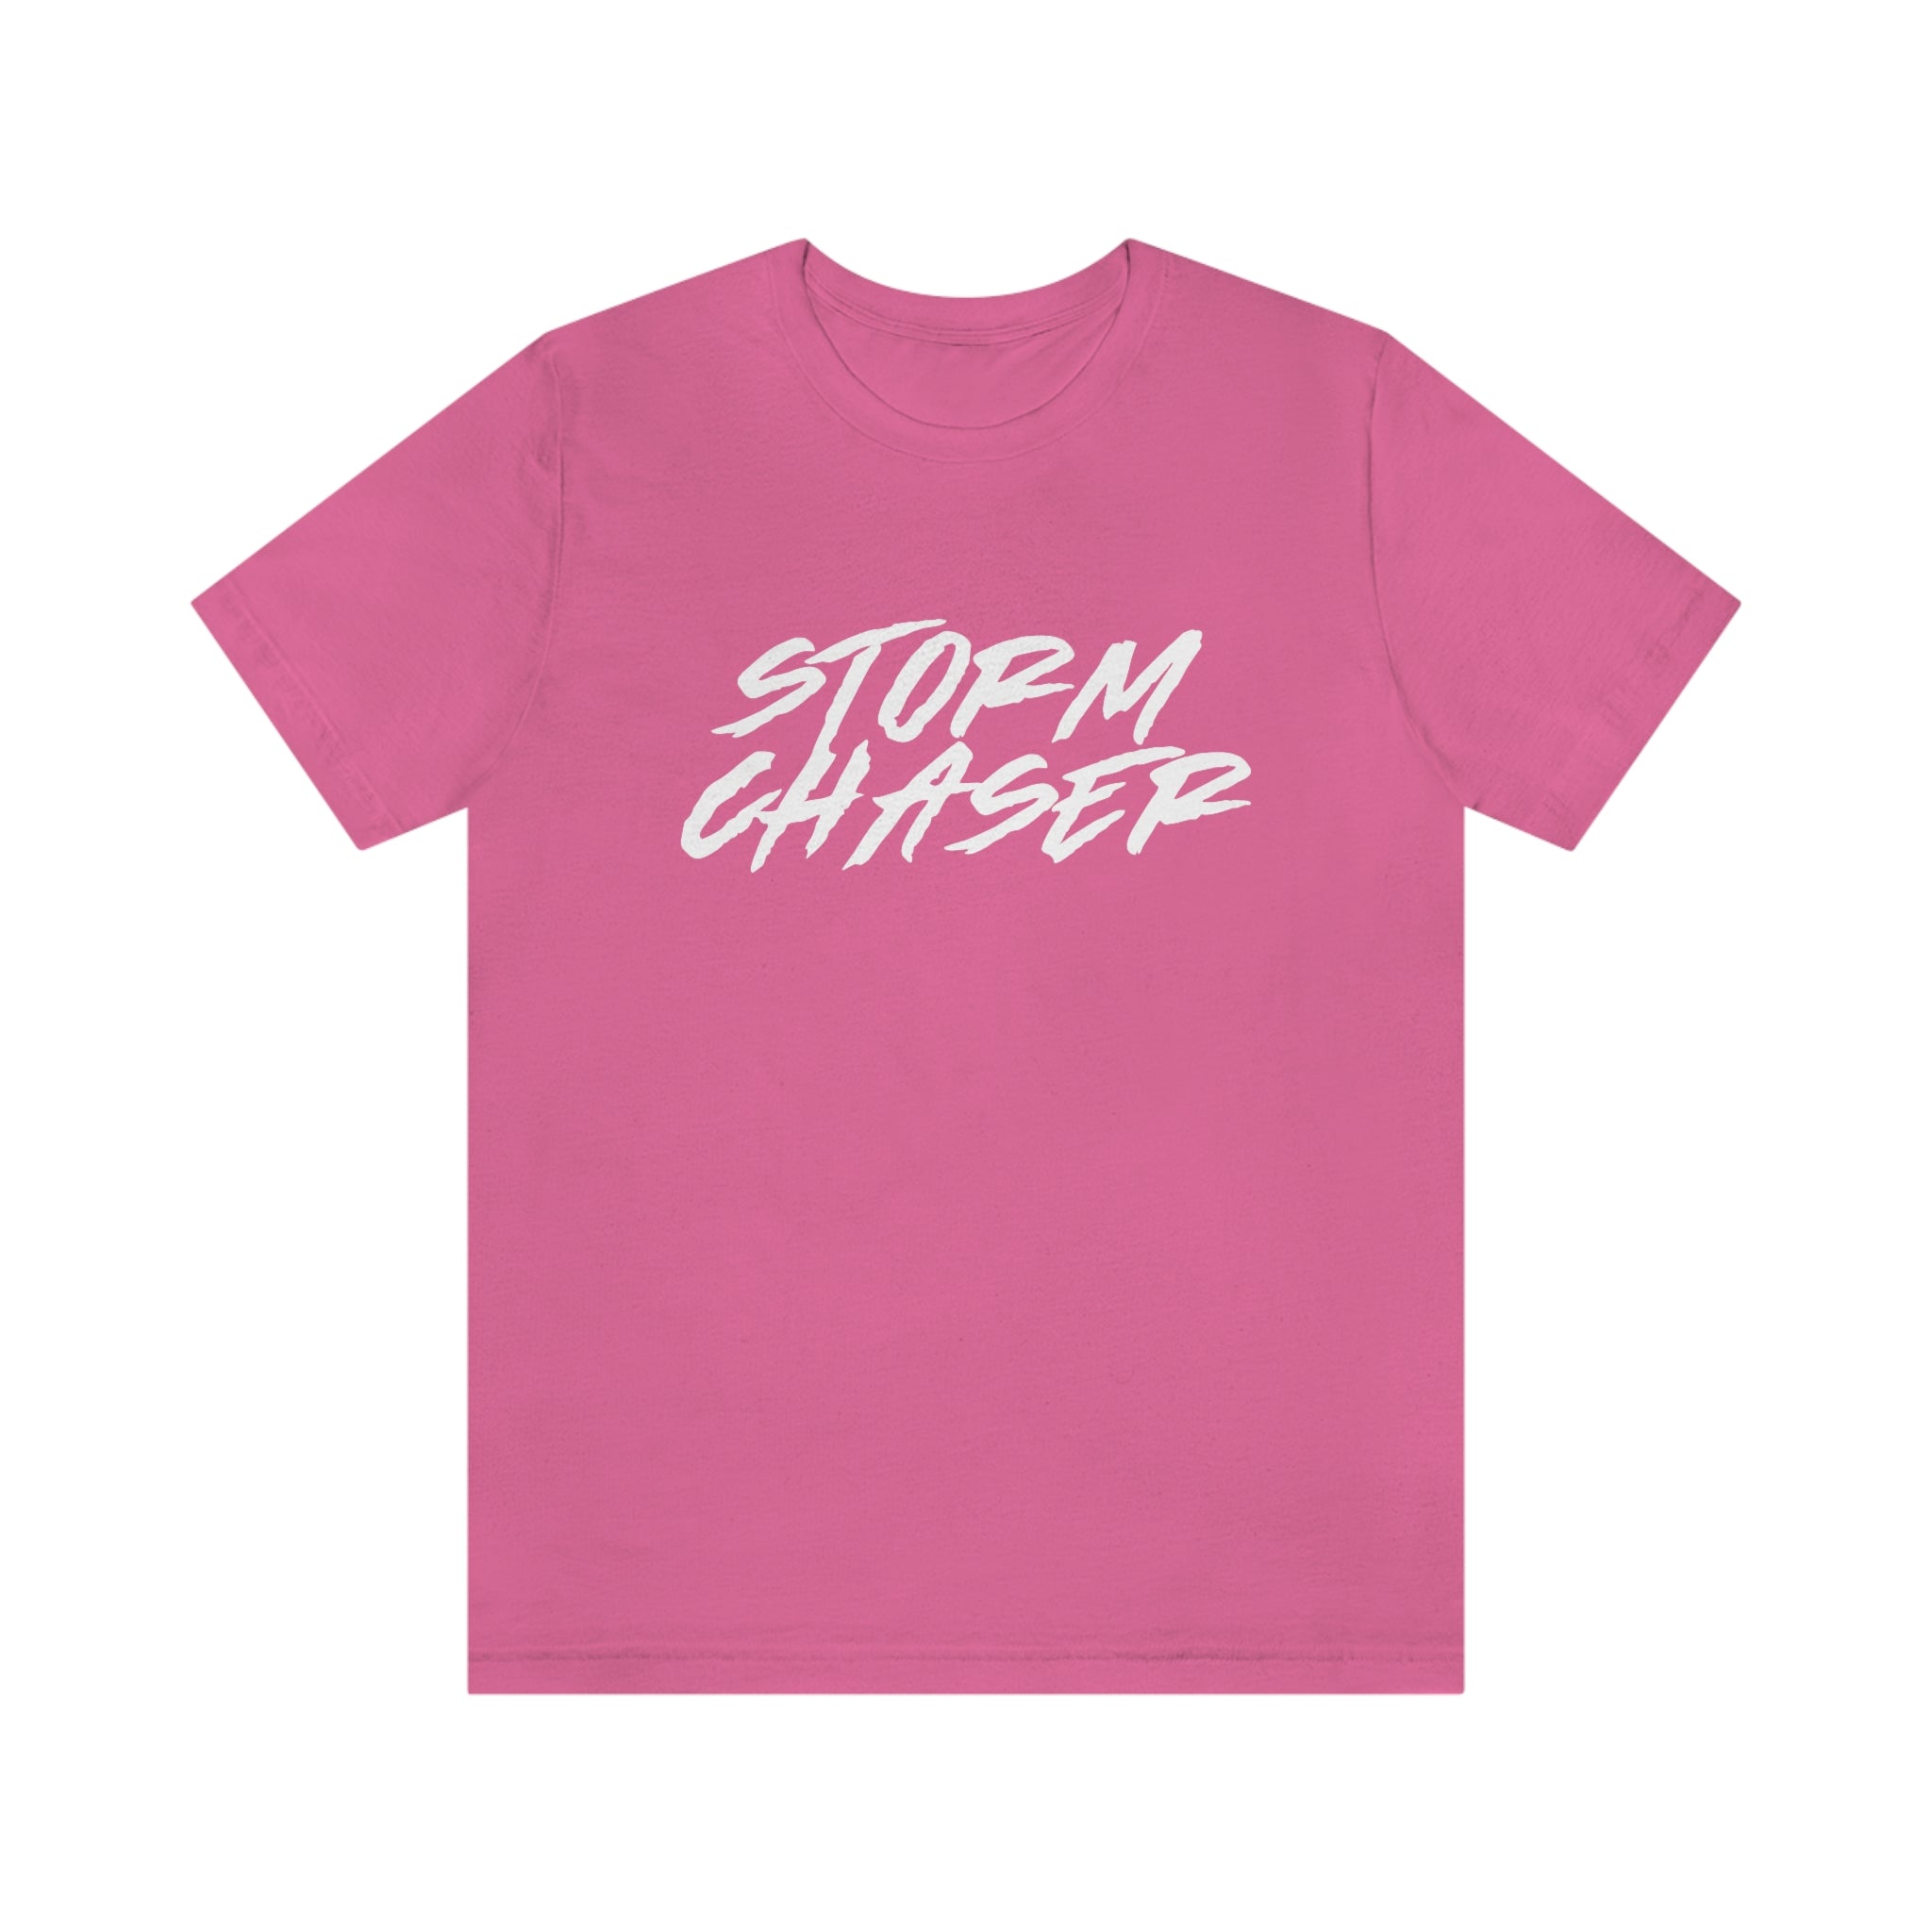 The Storm Chaser Tee 